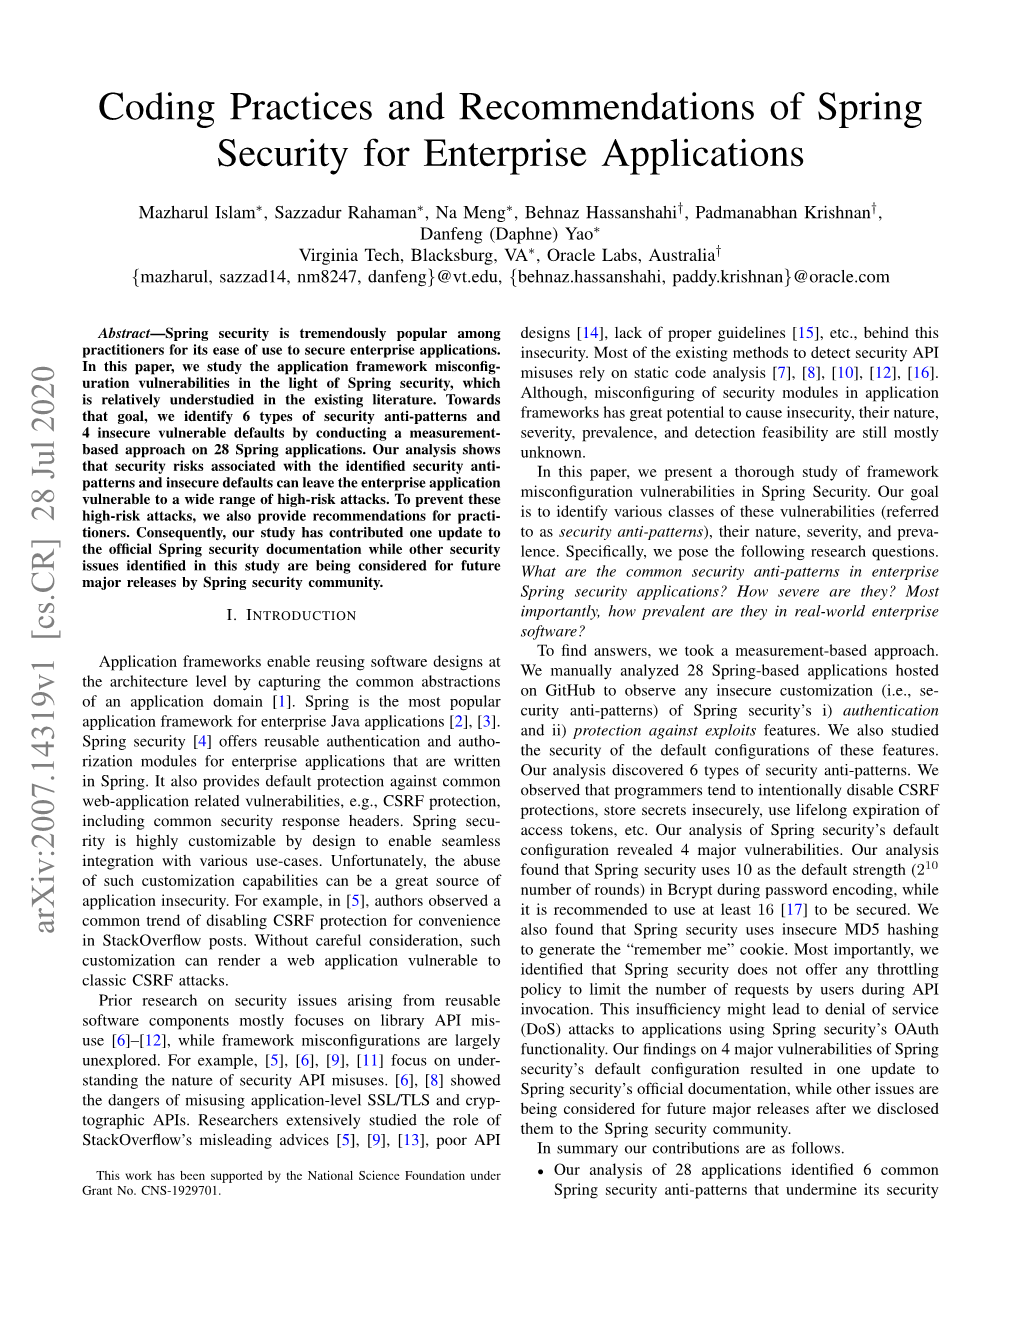 Coding Practices and Recommendations of Spring Security for Enterprise Applications